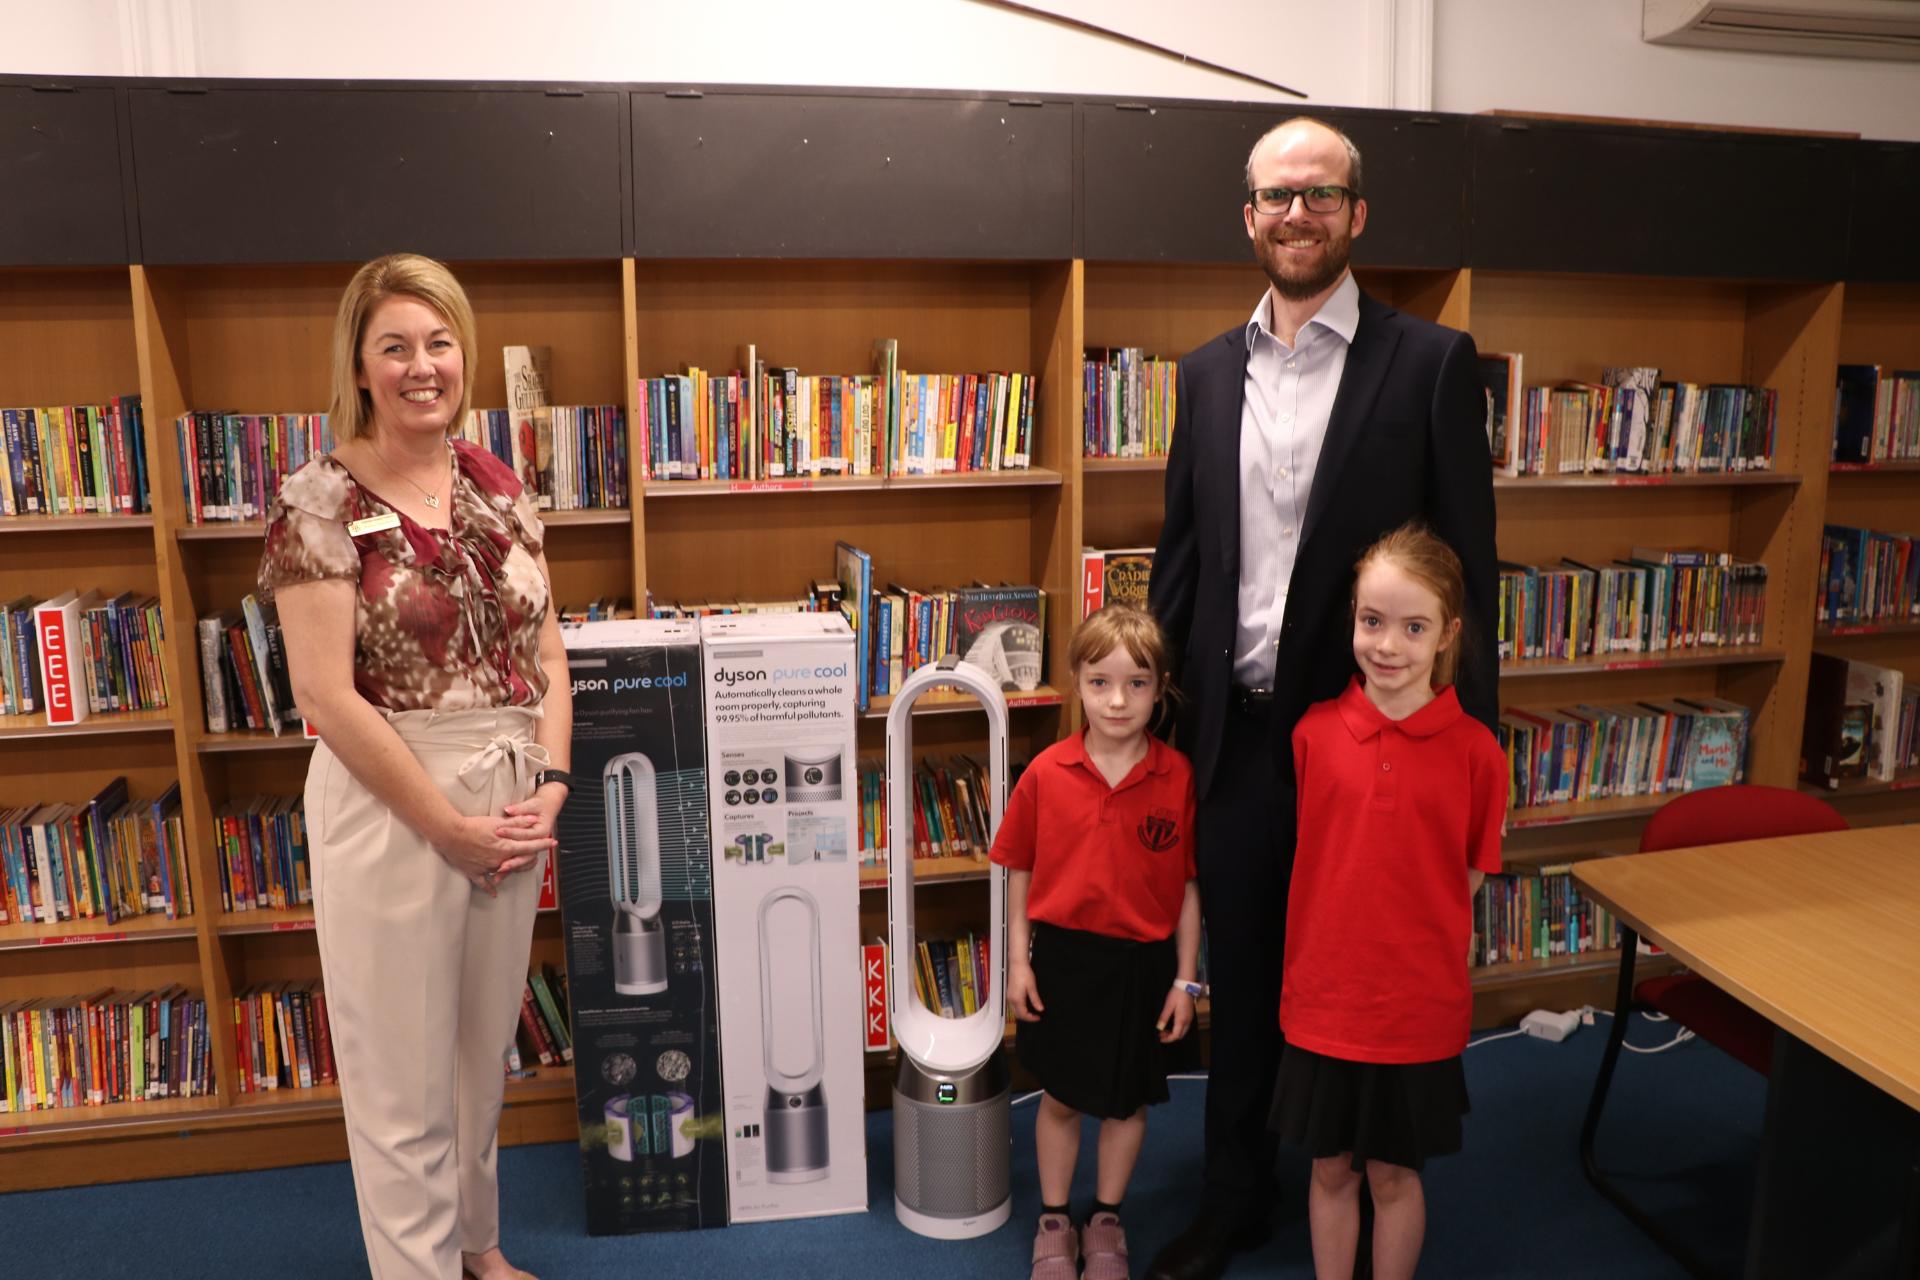 Dyson donating product to local school